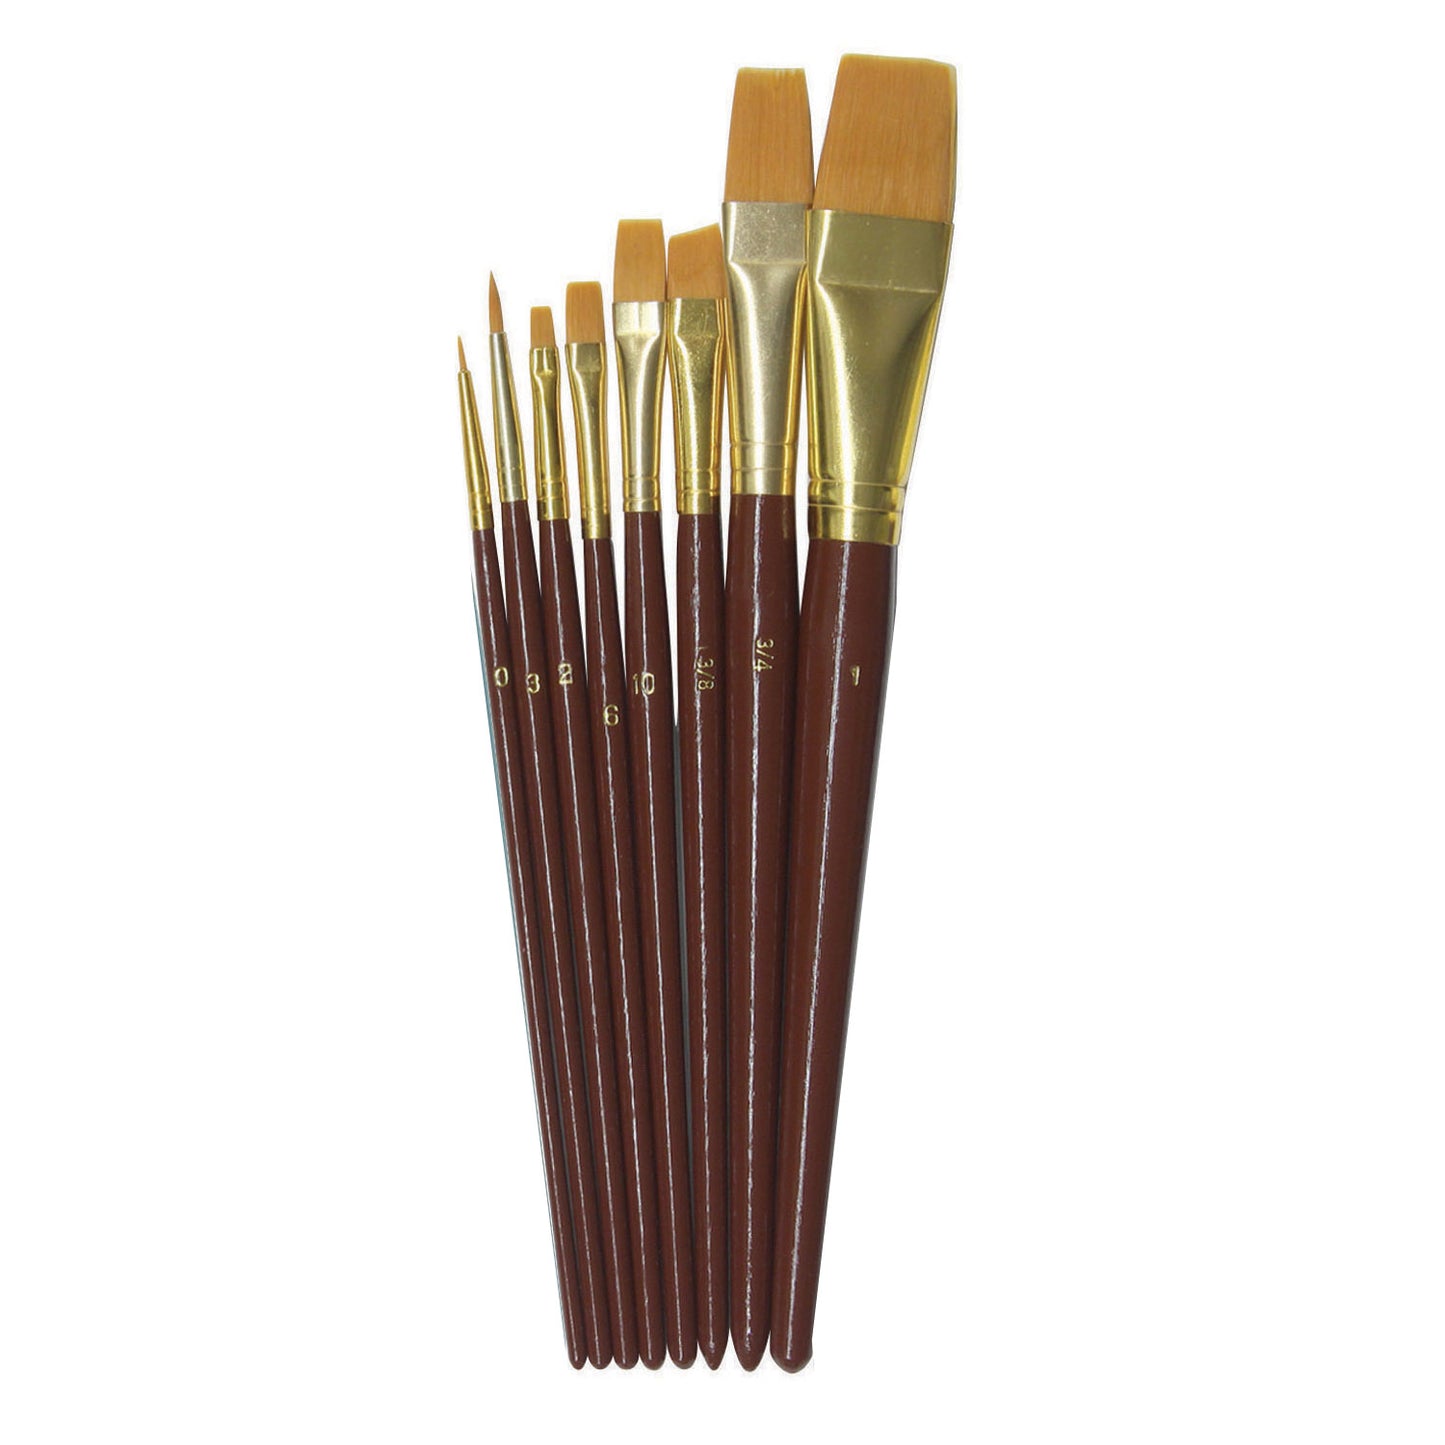 Deluxe Brush Assortment, Assorted Colors & Sizes, 24 Brushes